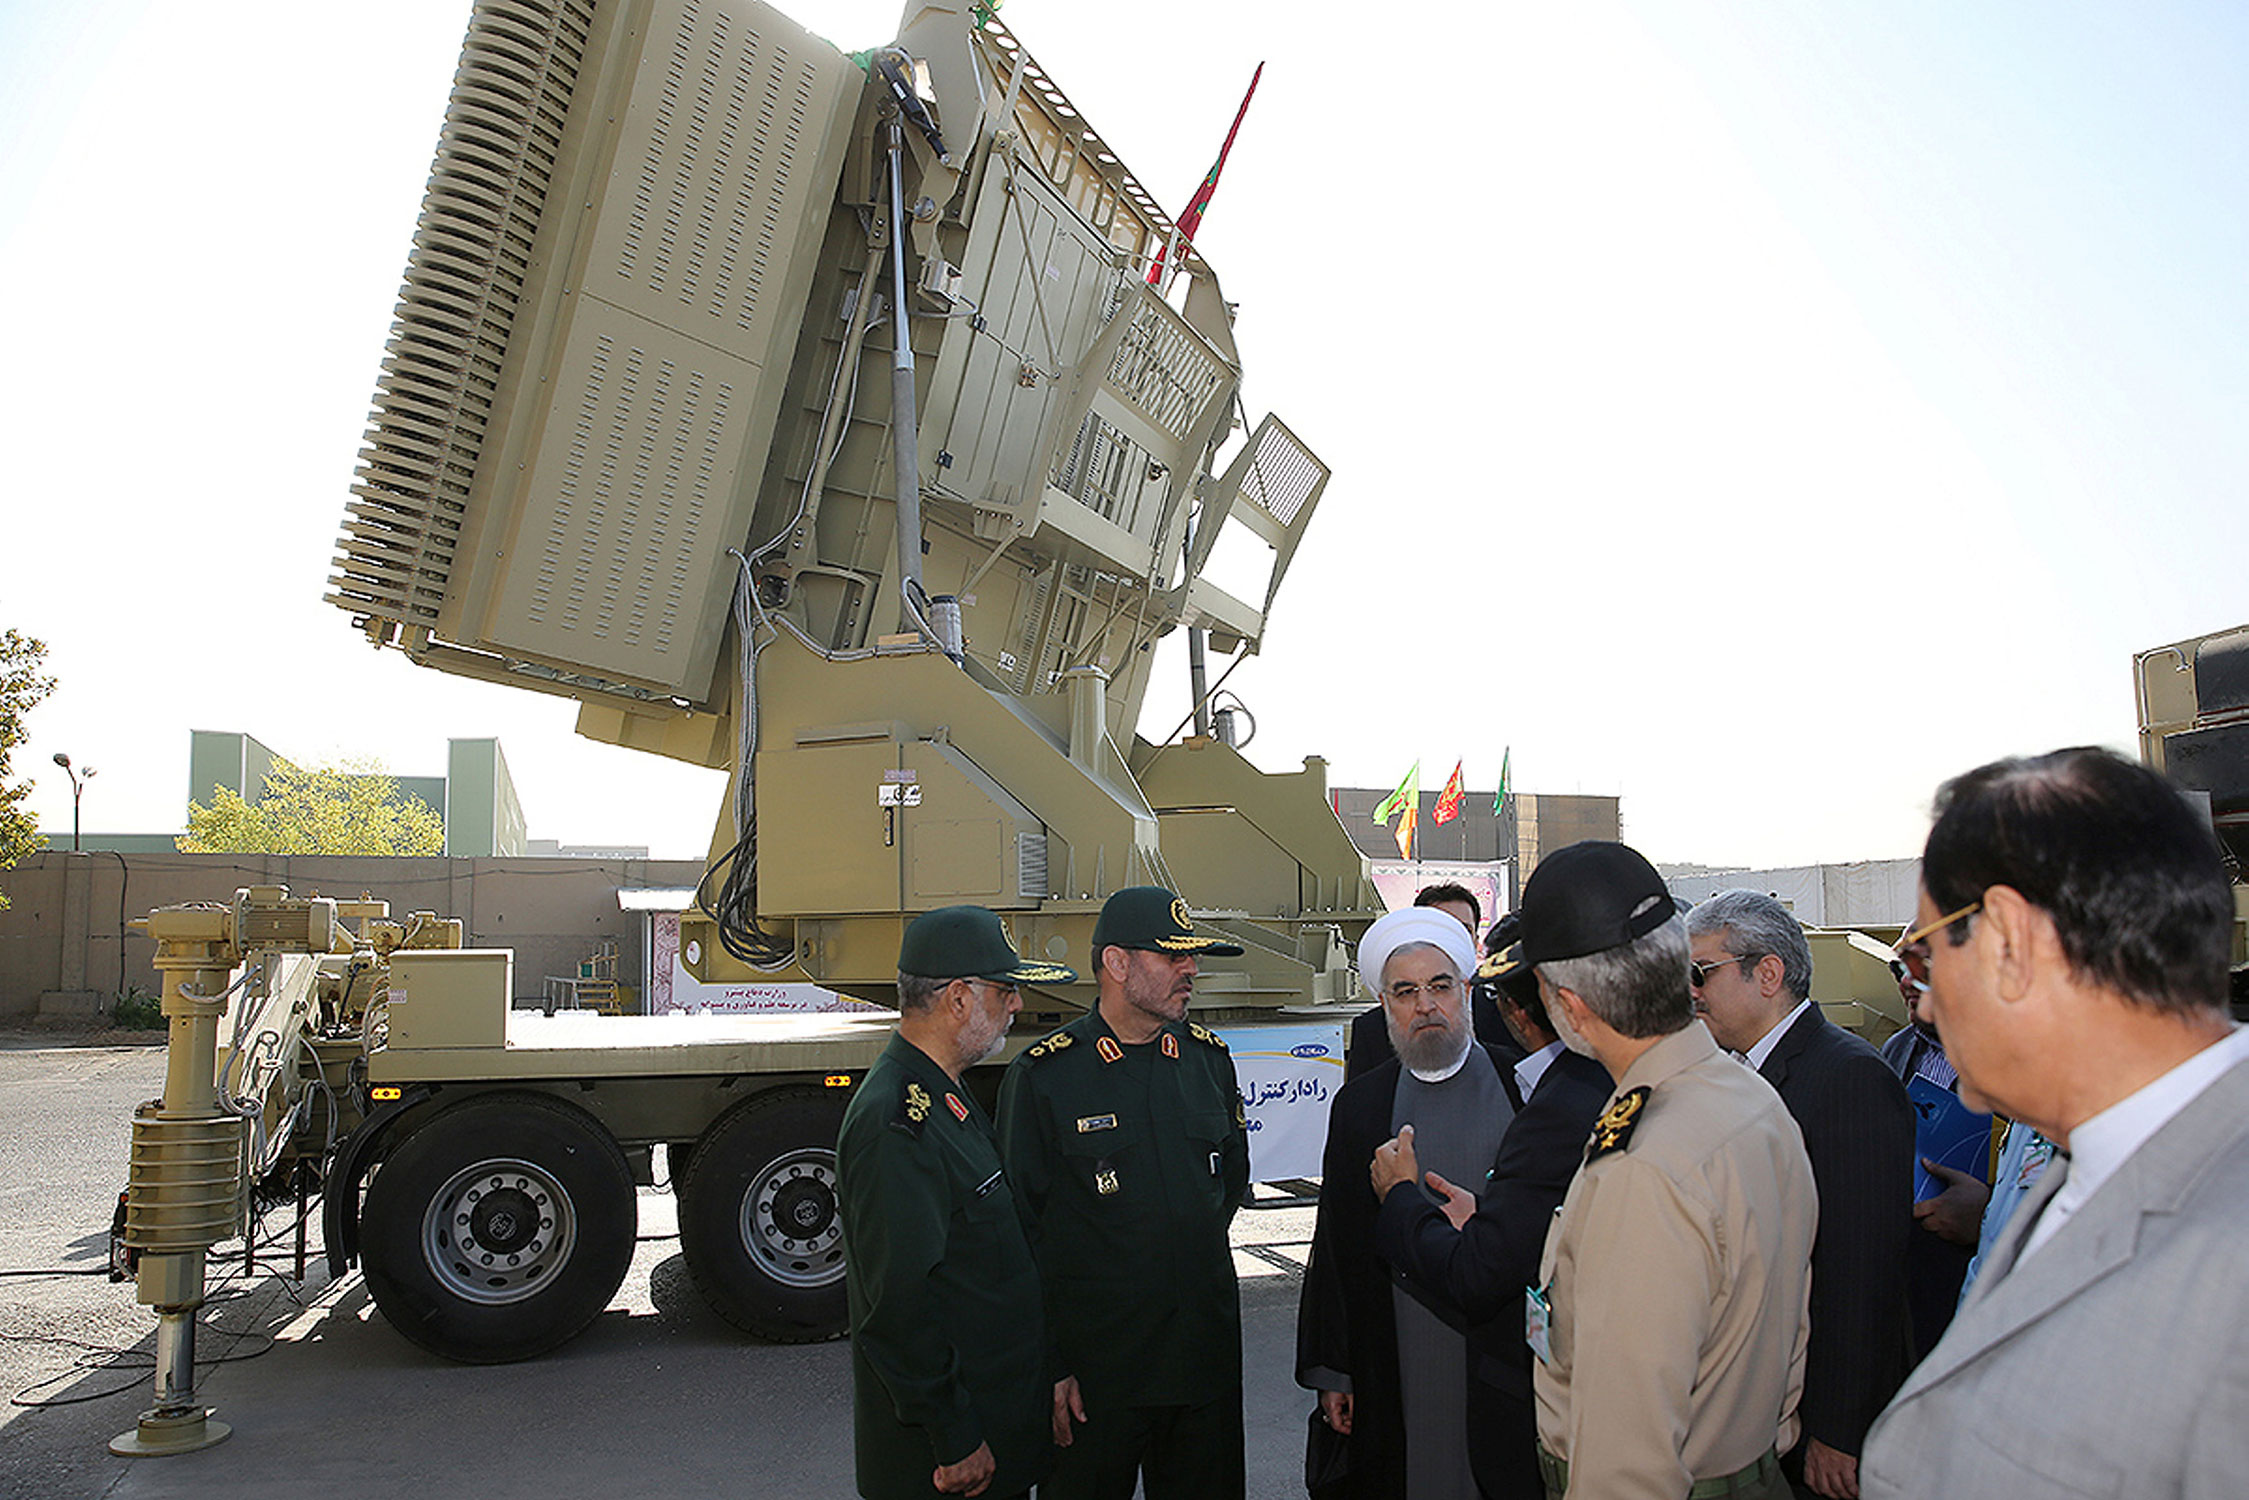 Iran's President Hassan Rouhani with the Bavar-373 air defense missile system